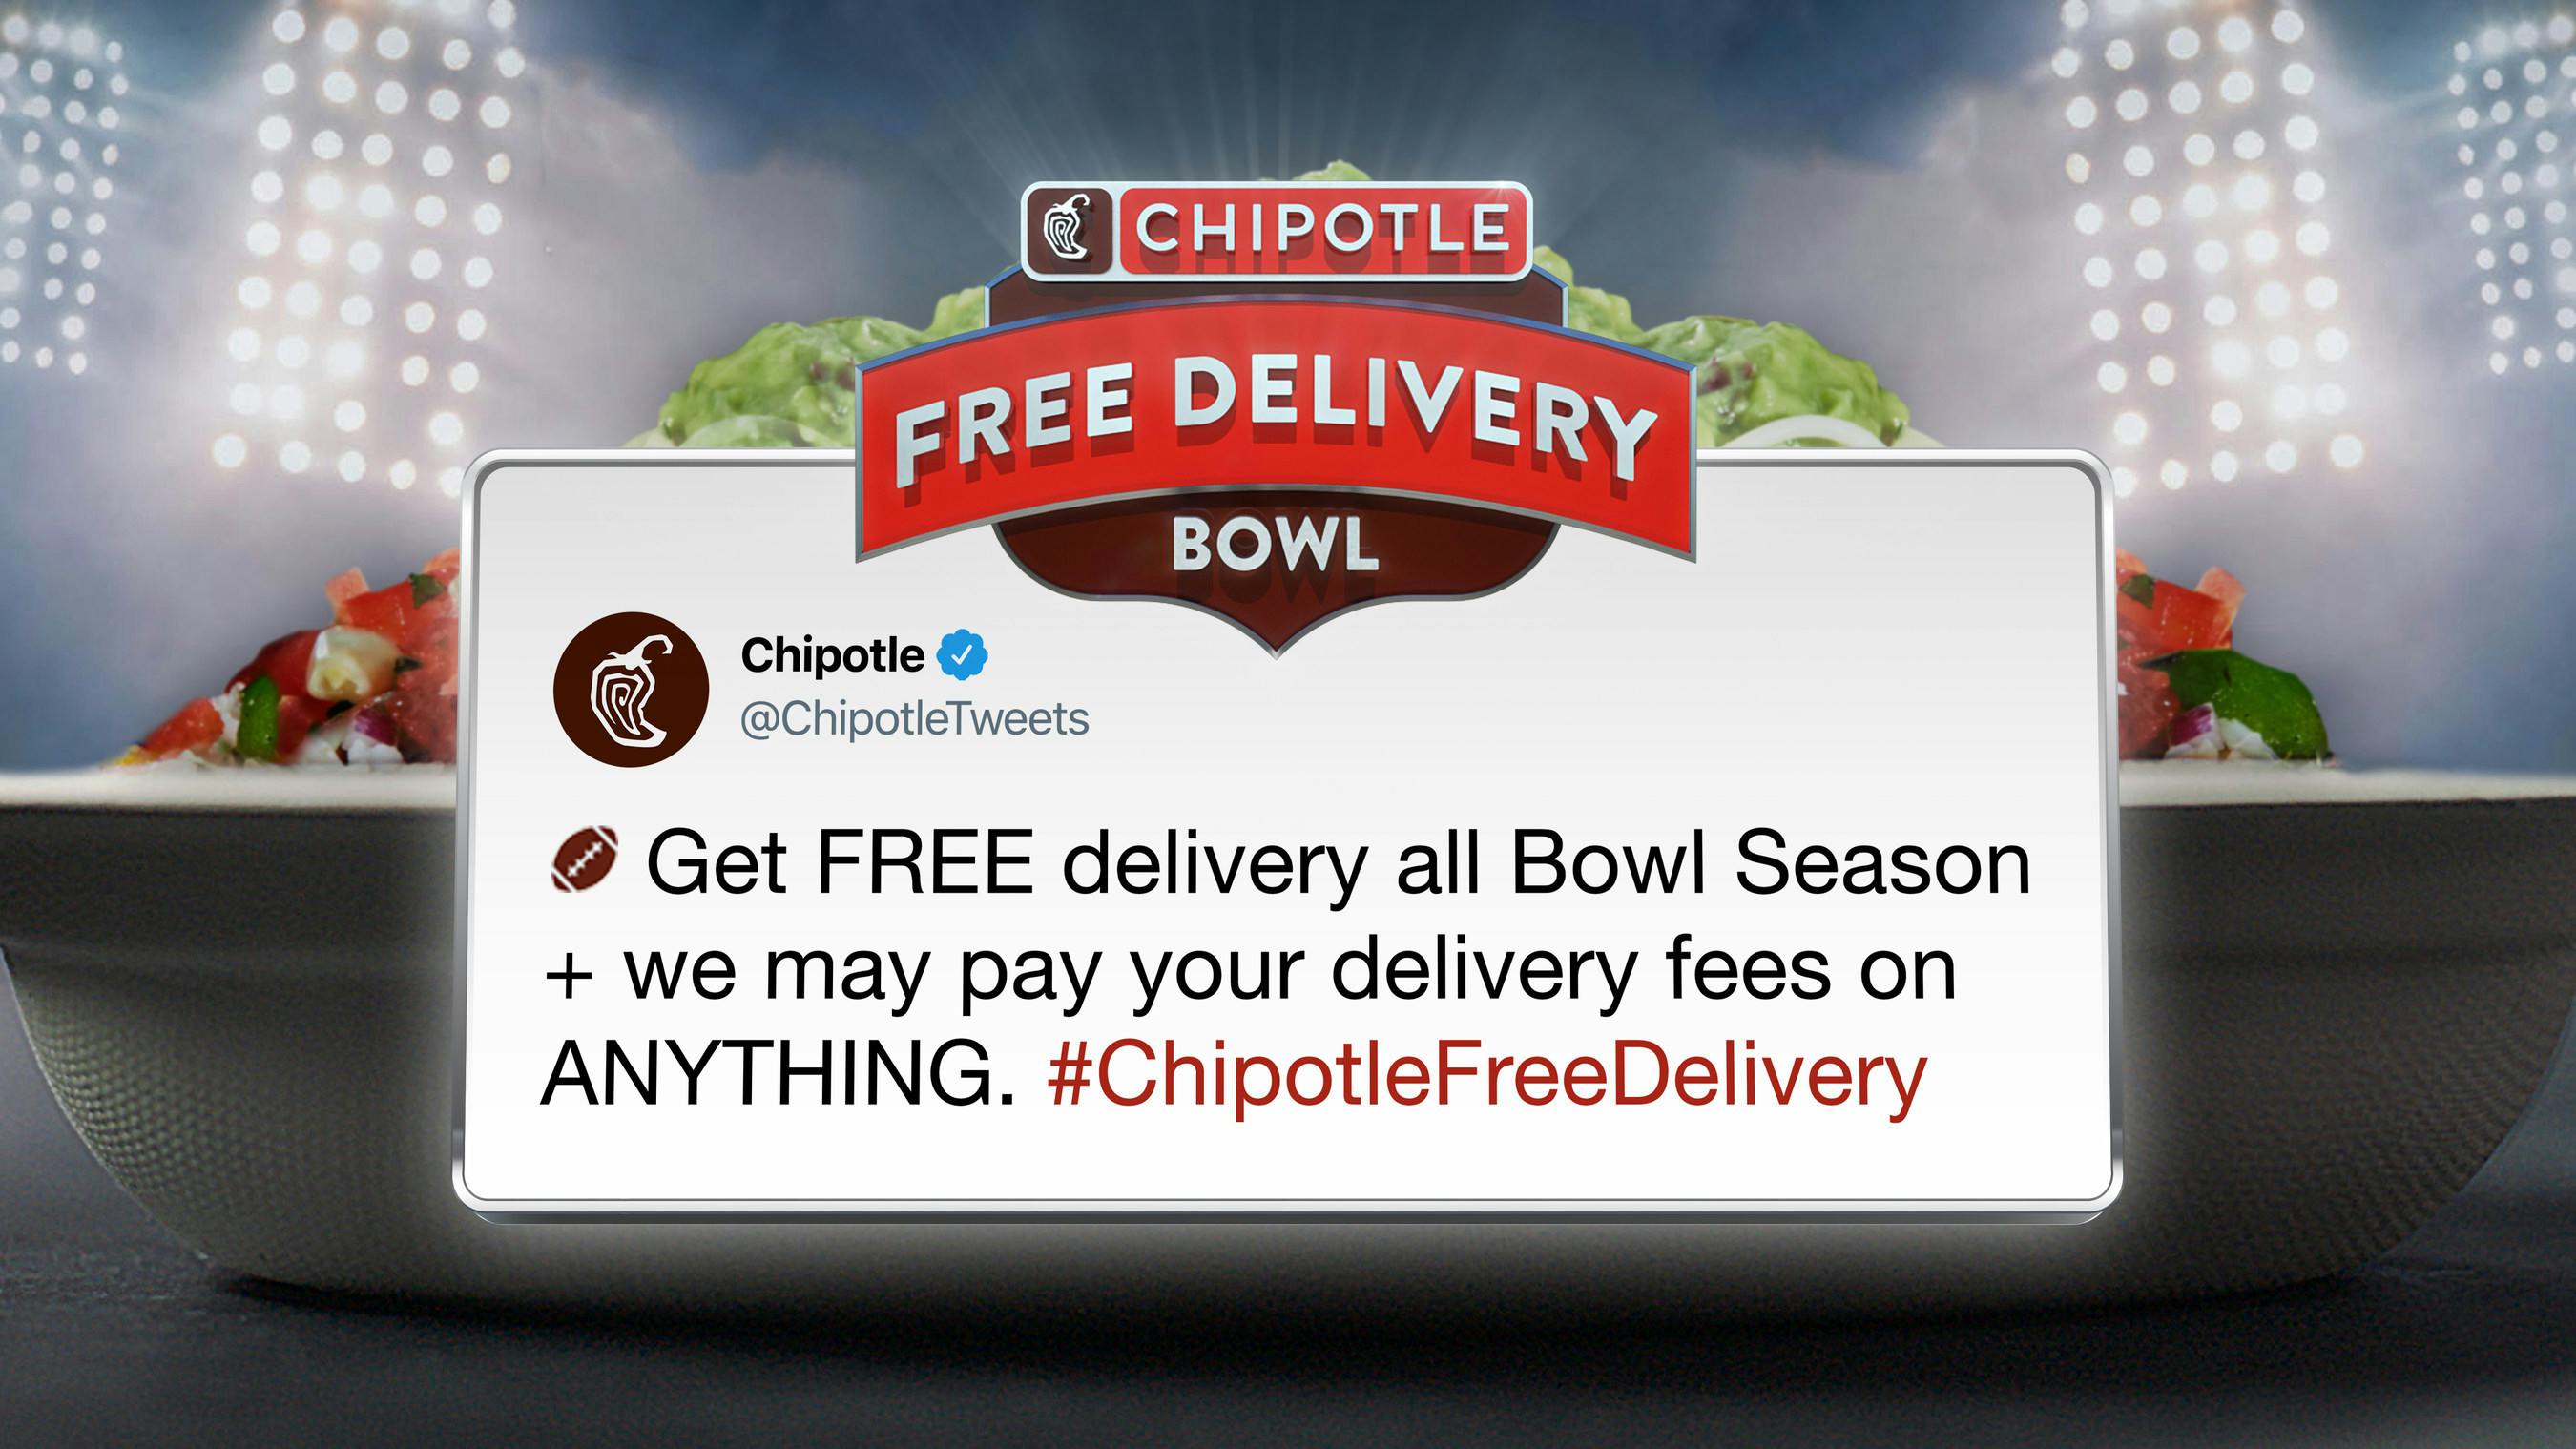 Chipotle free delivery offer on Twitter